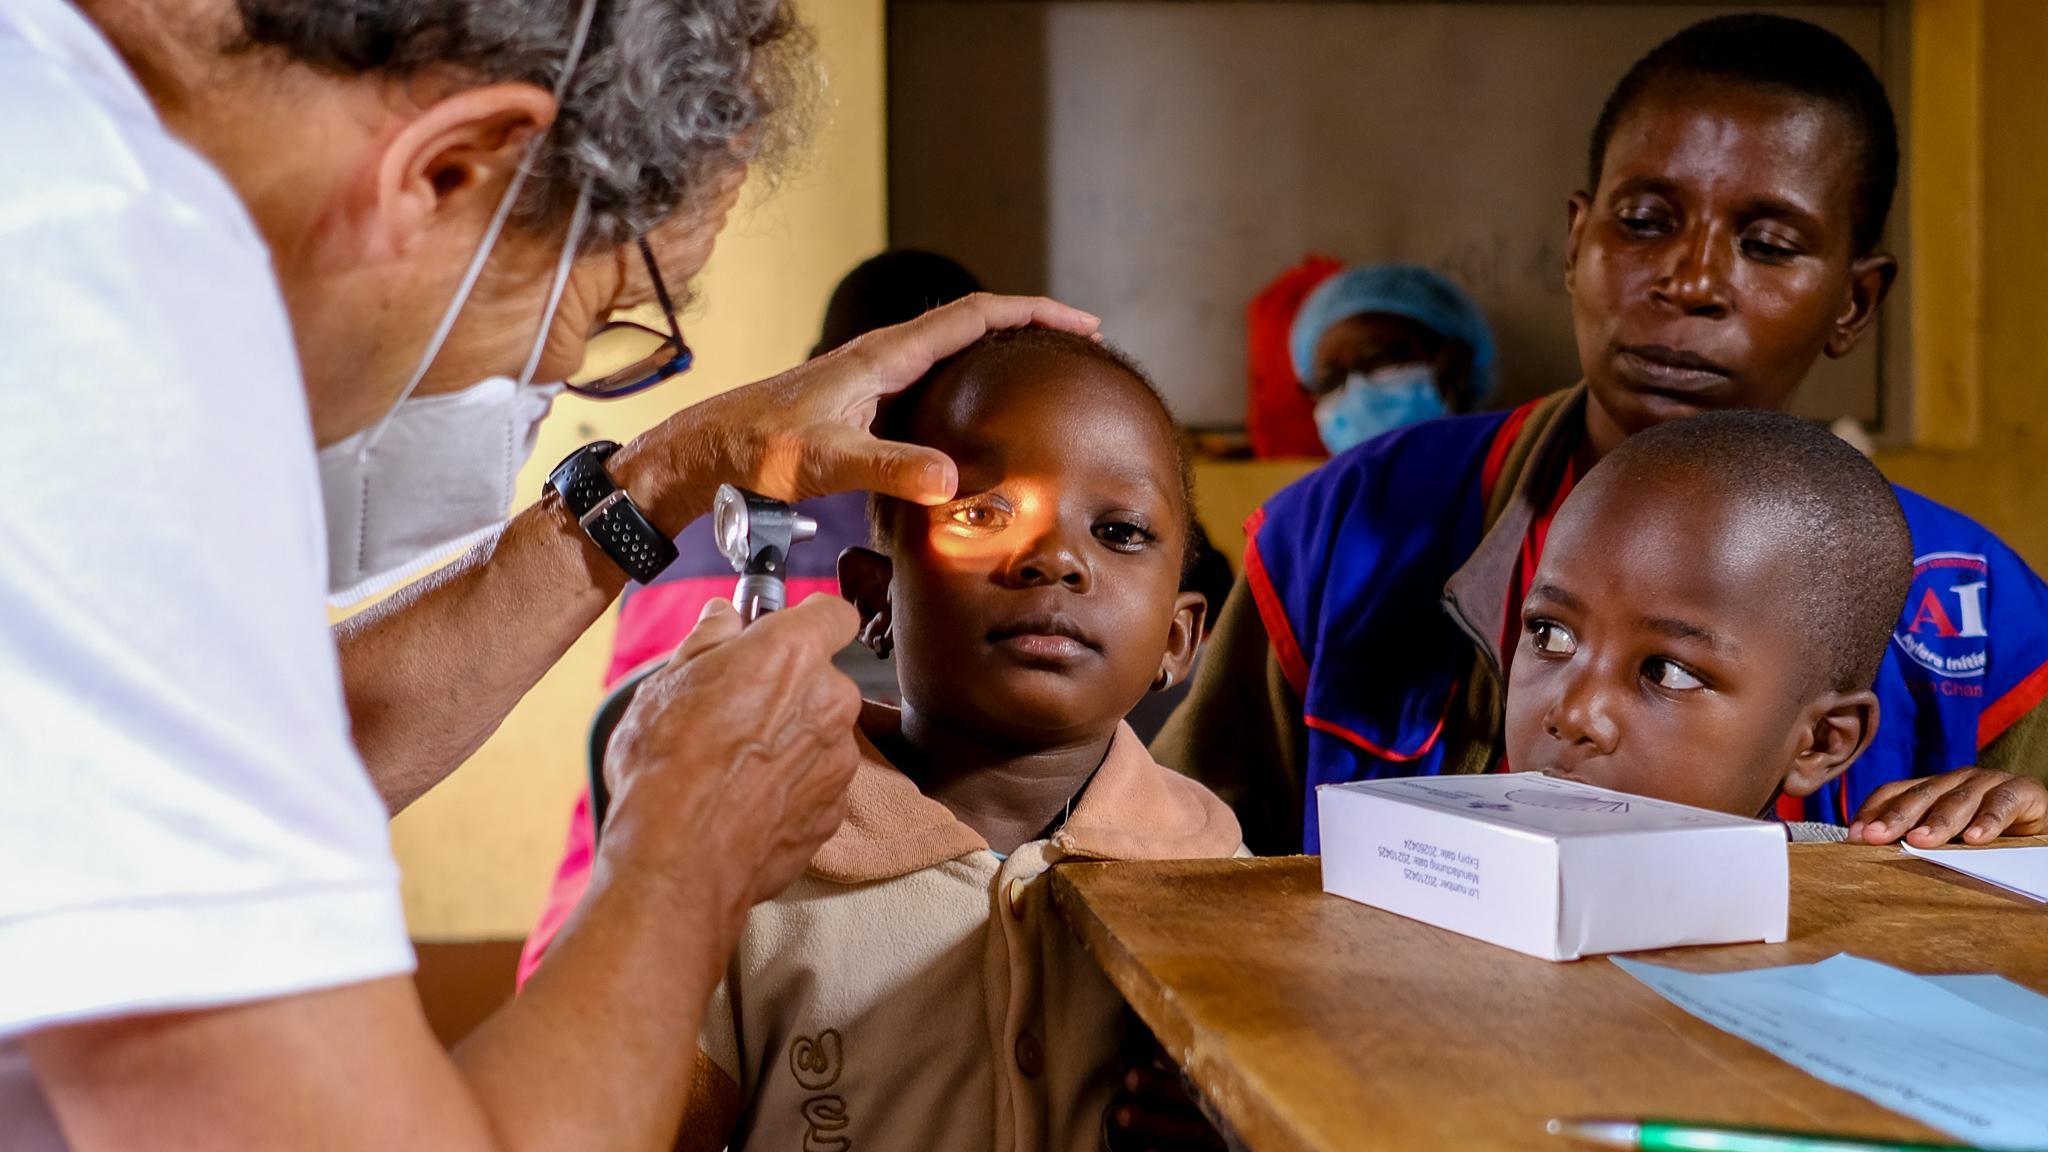 An ophthalmologist shines a light into a child's eye